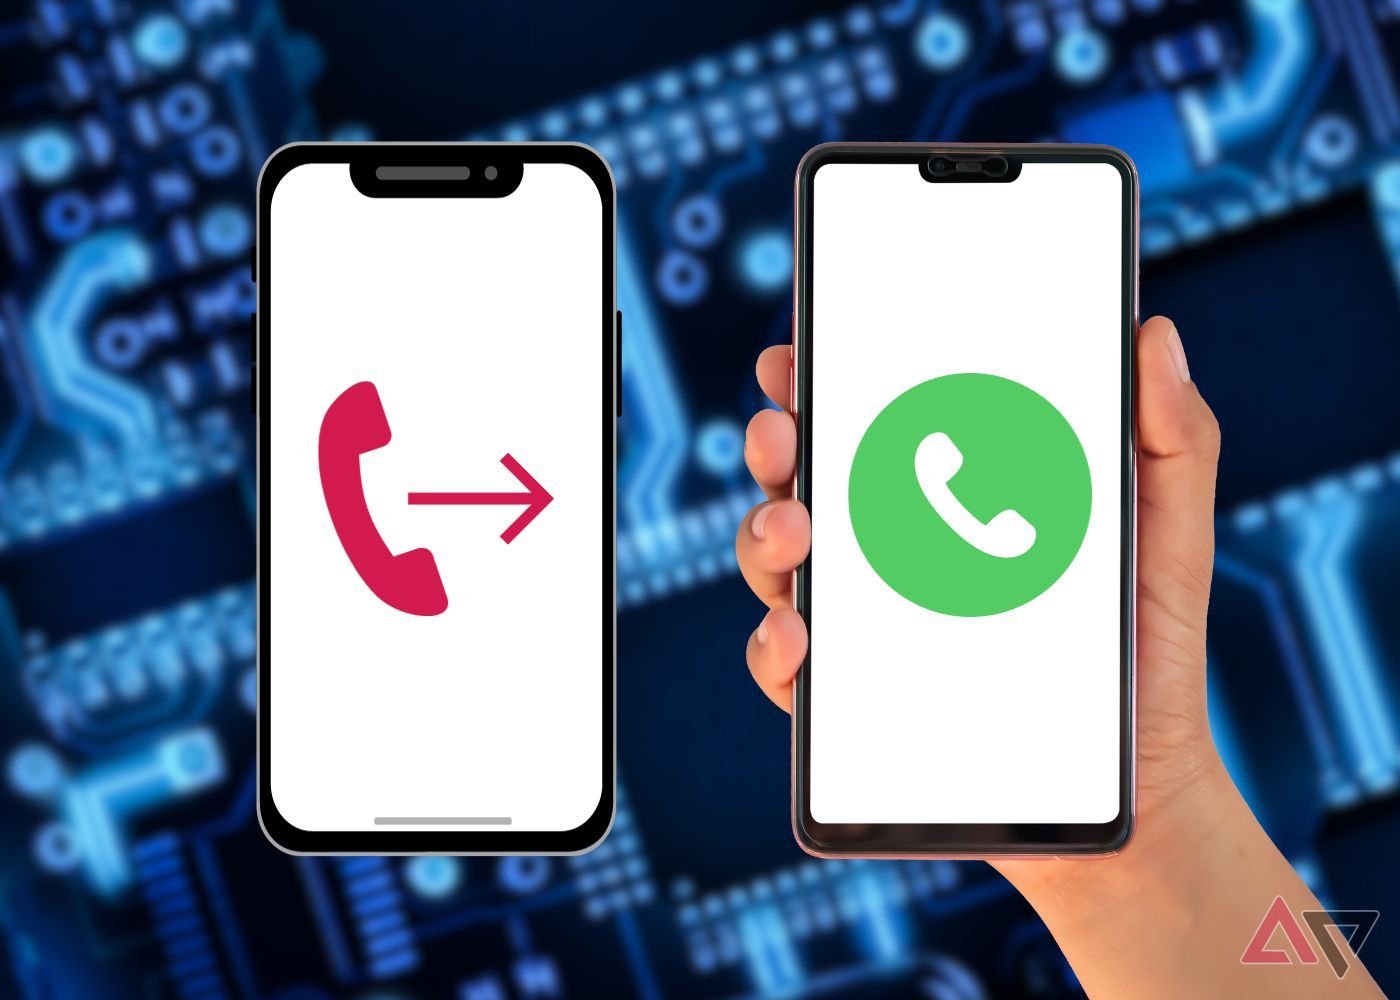 two phones one with a call forwarding icon and one with a call answering icon.